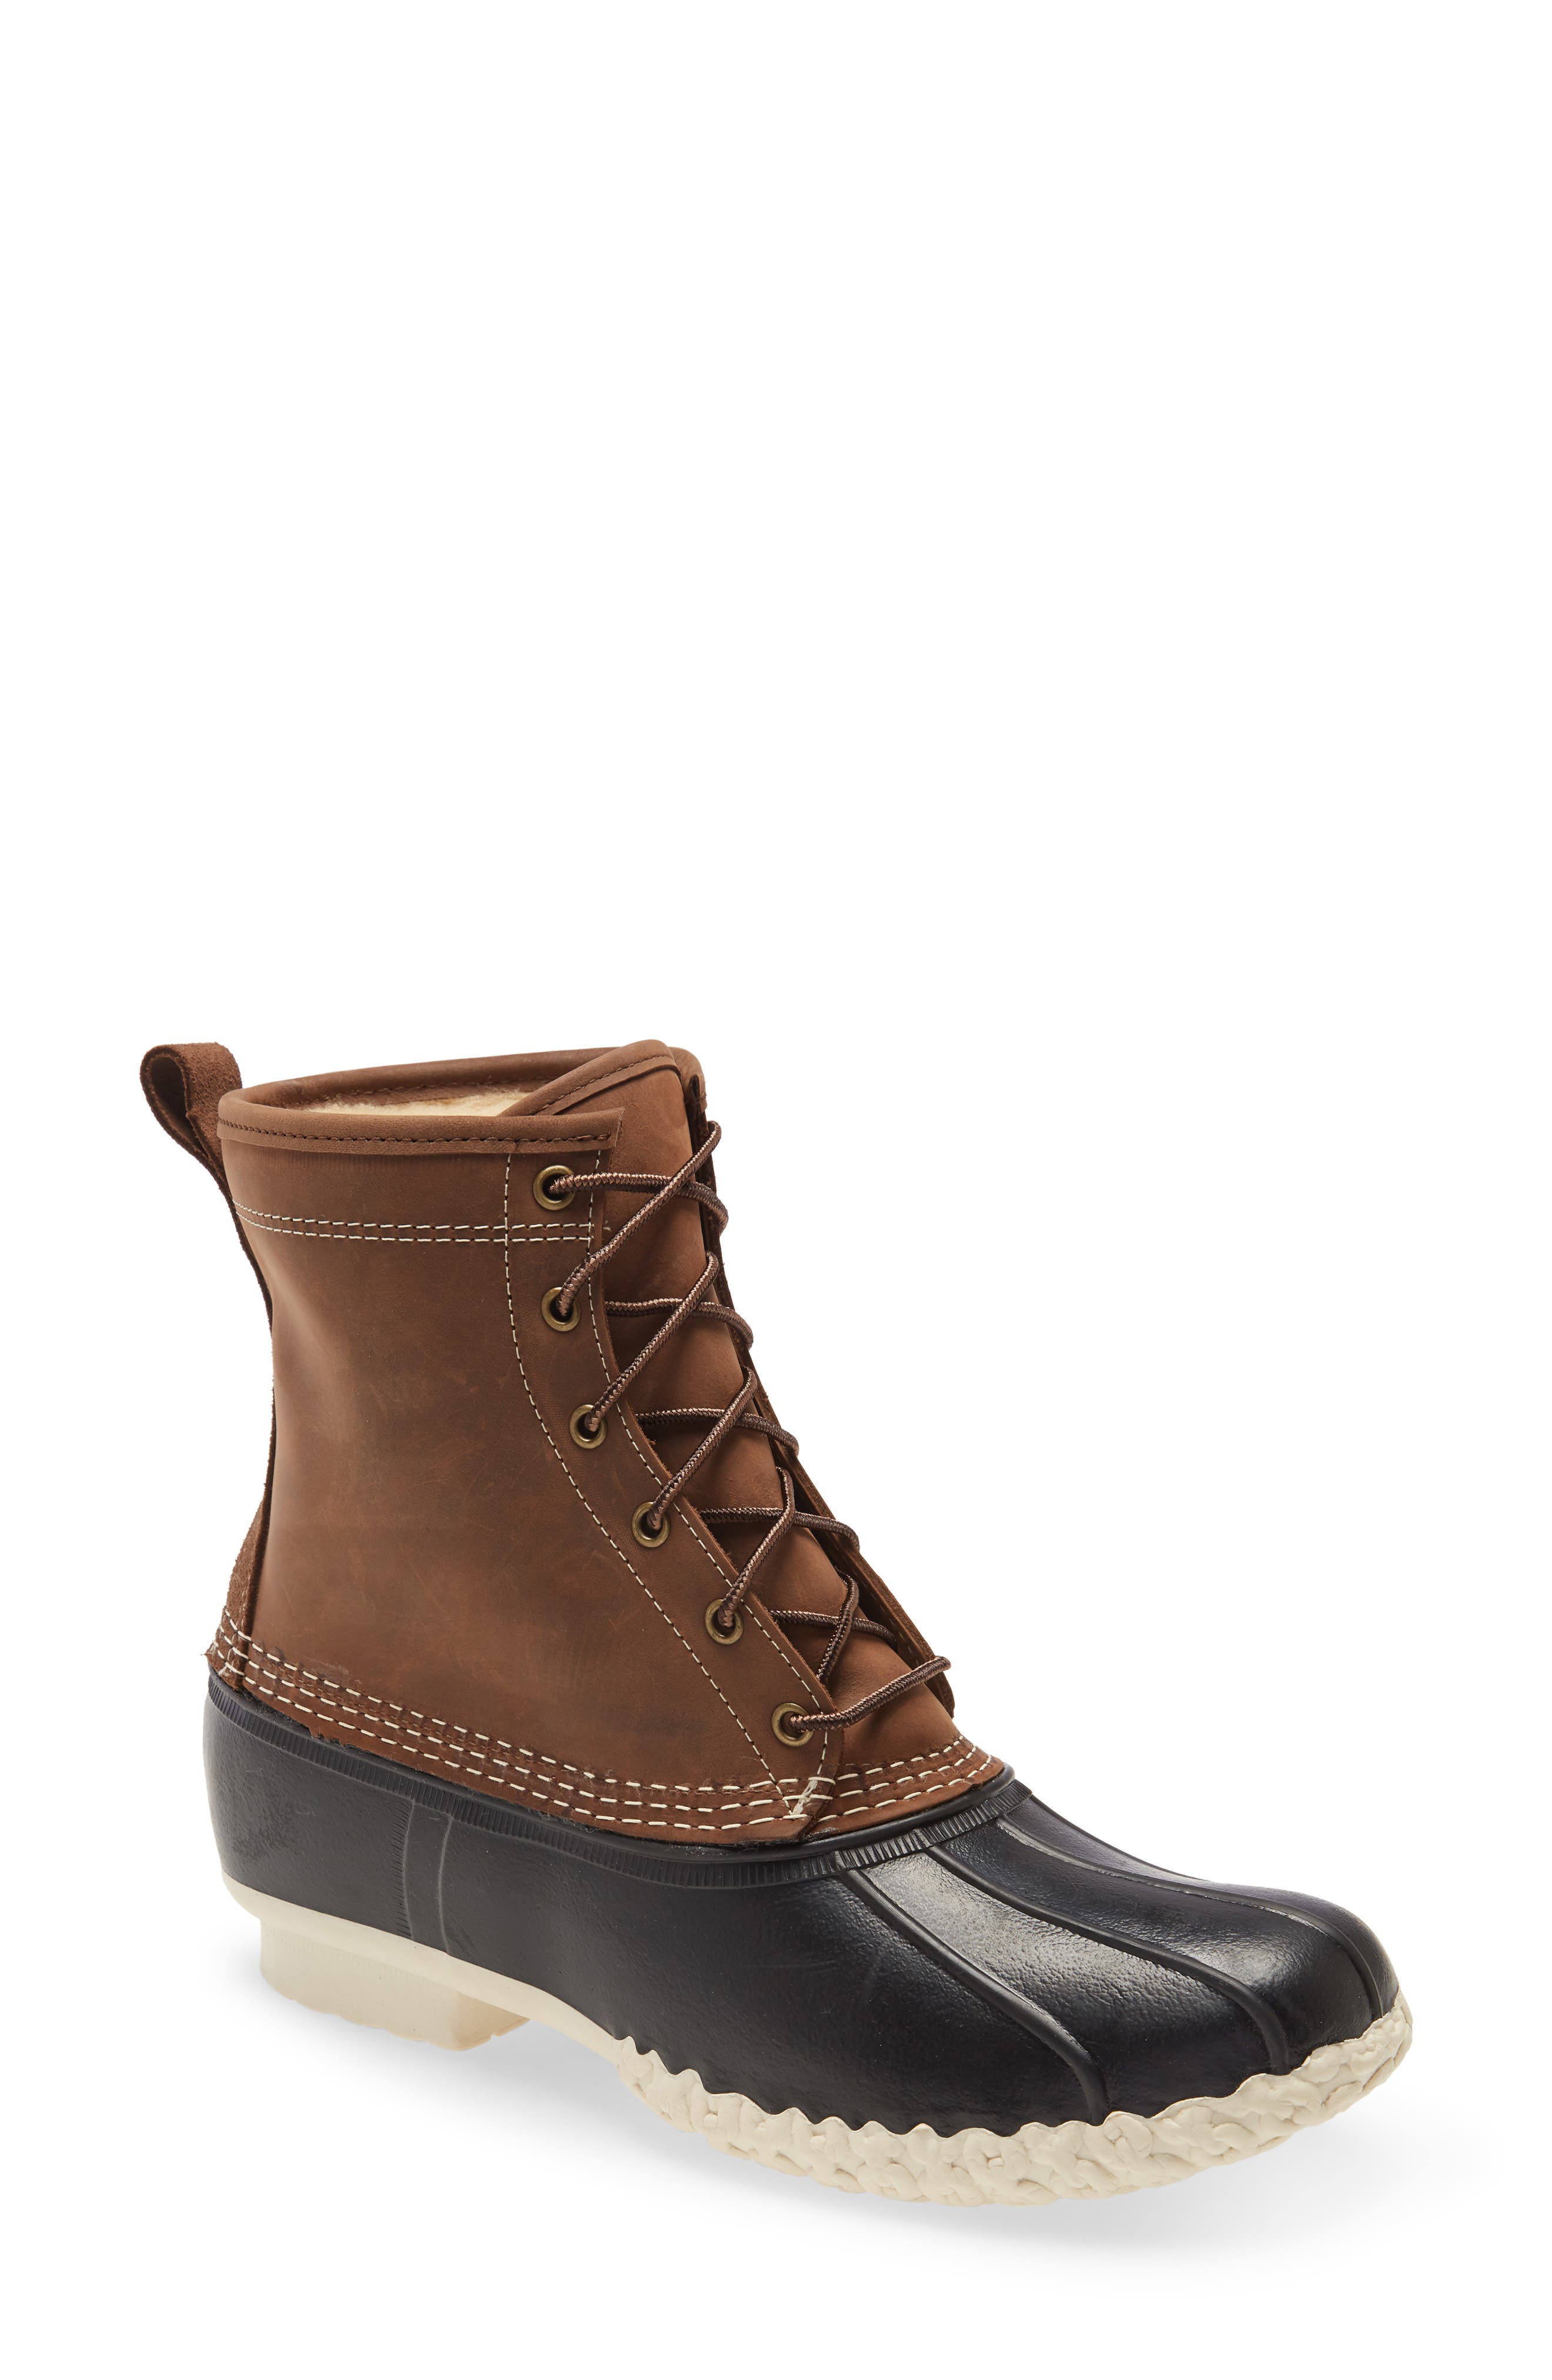 ll bean shearling lined boots